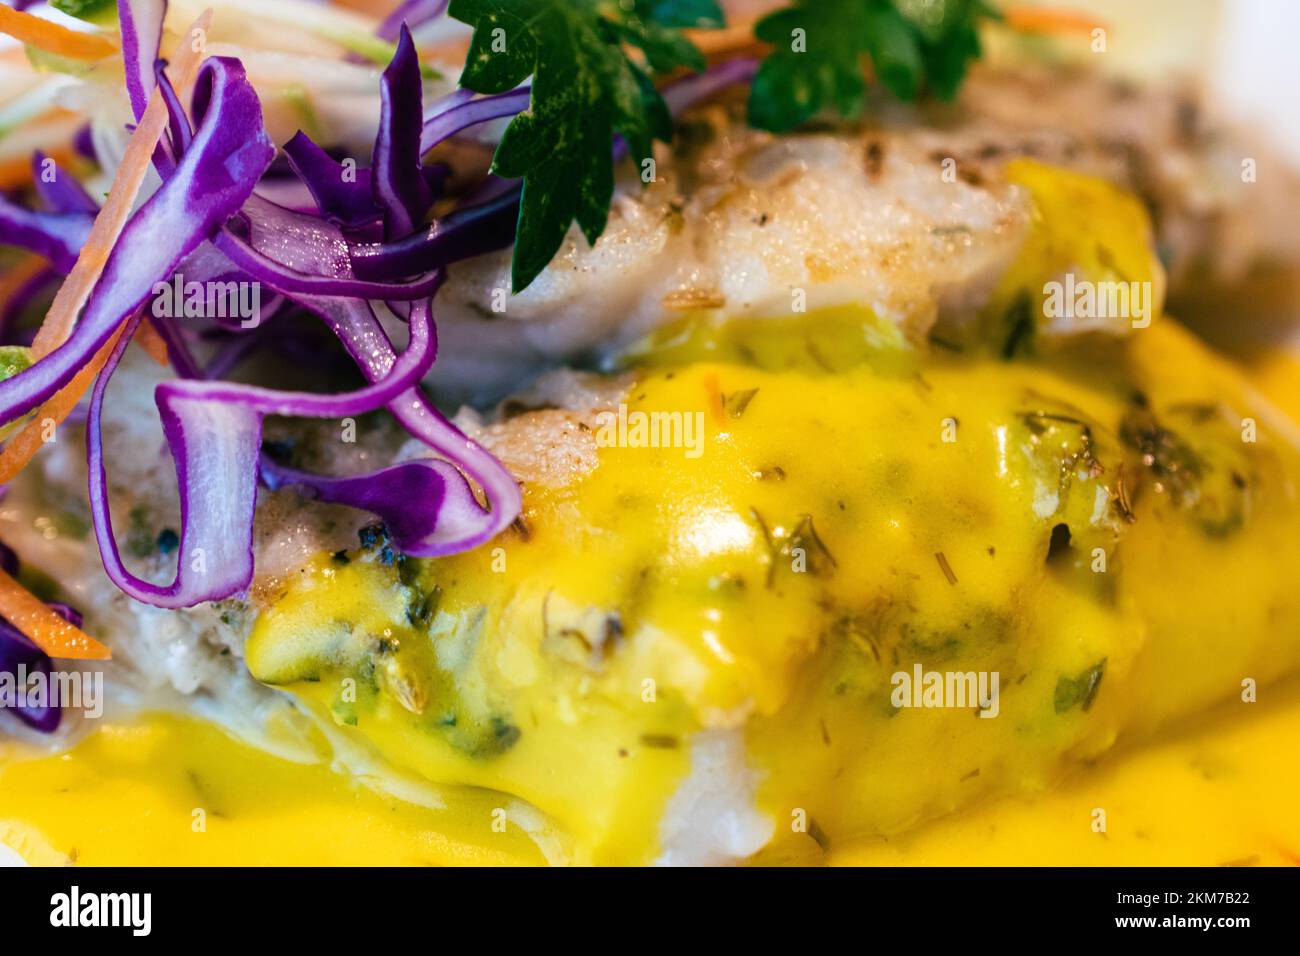 Close up on fish dish, with yellow sauce, parsley, and carrot slices. Stock Photo